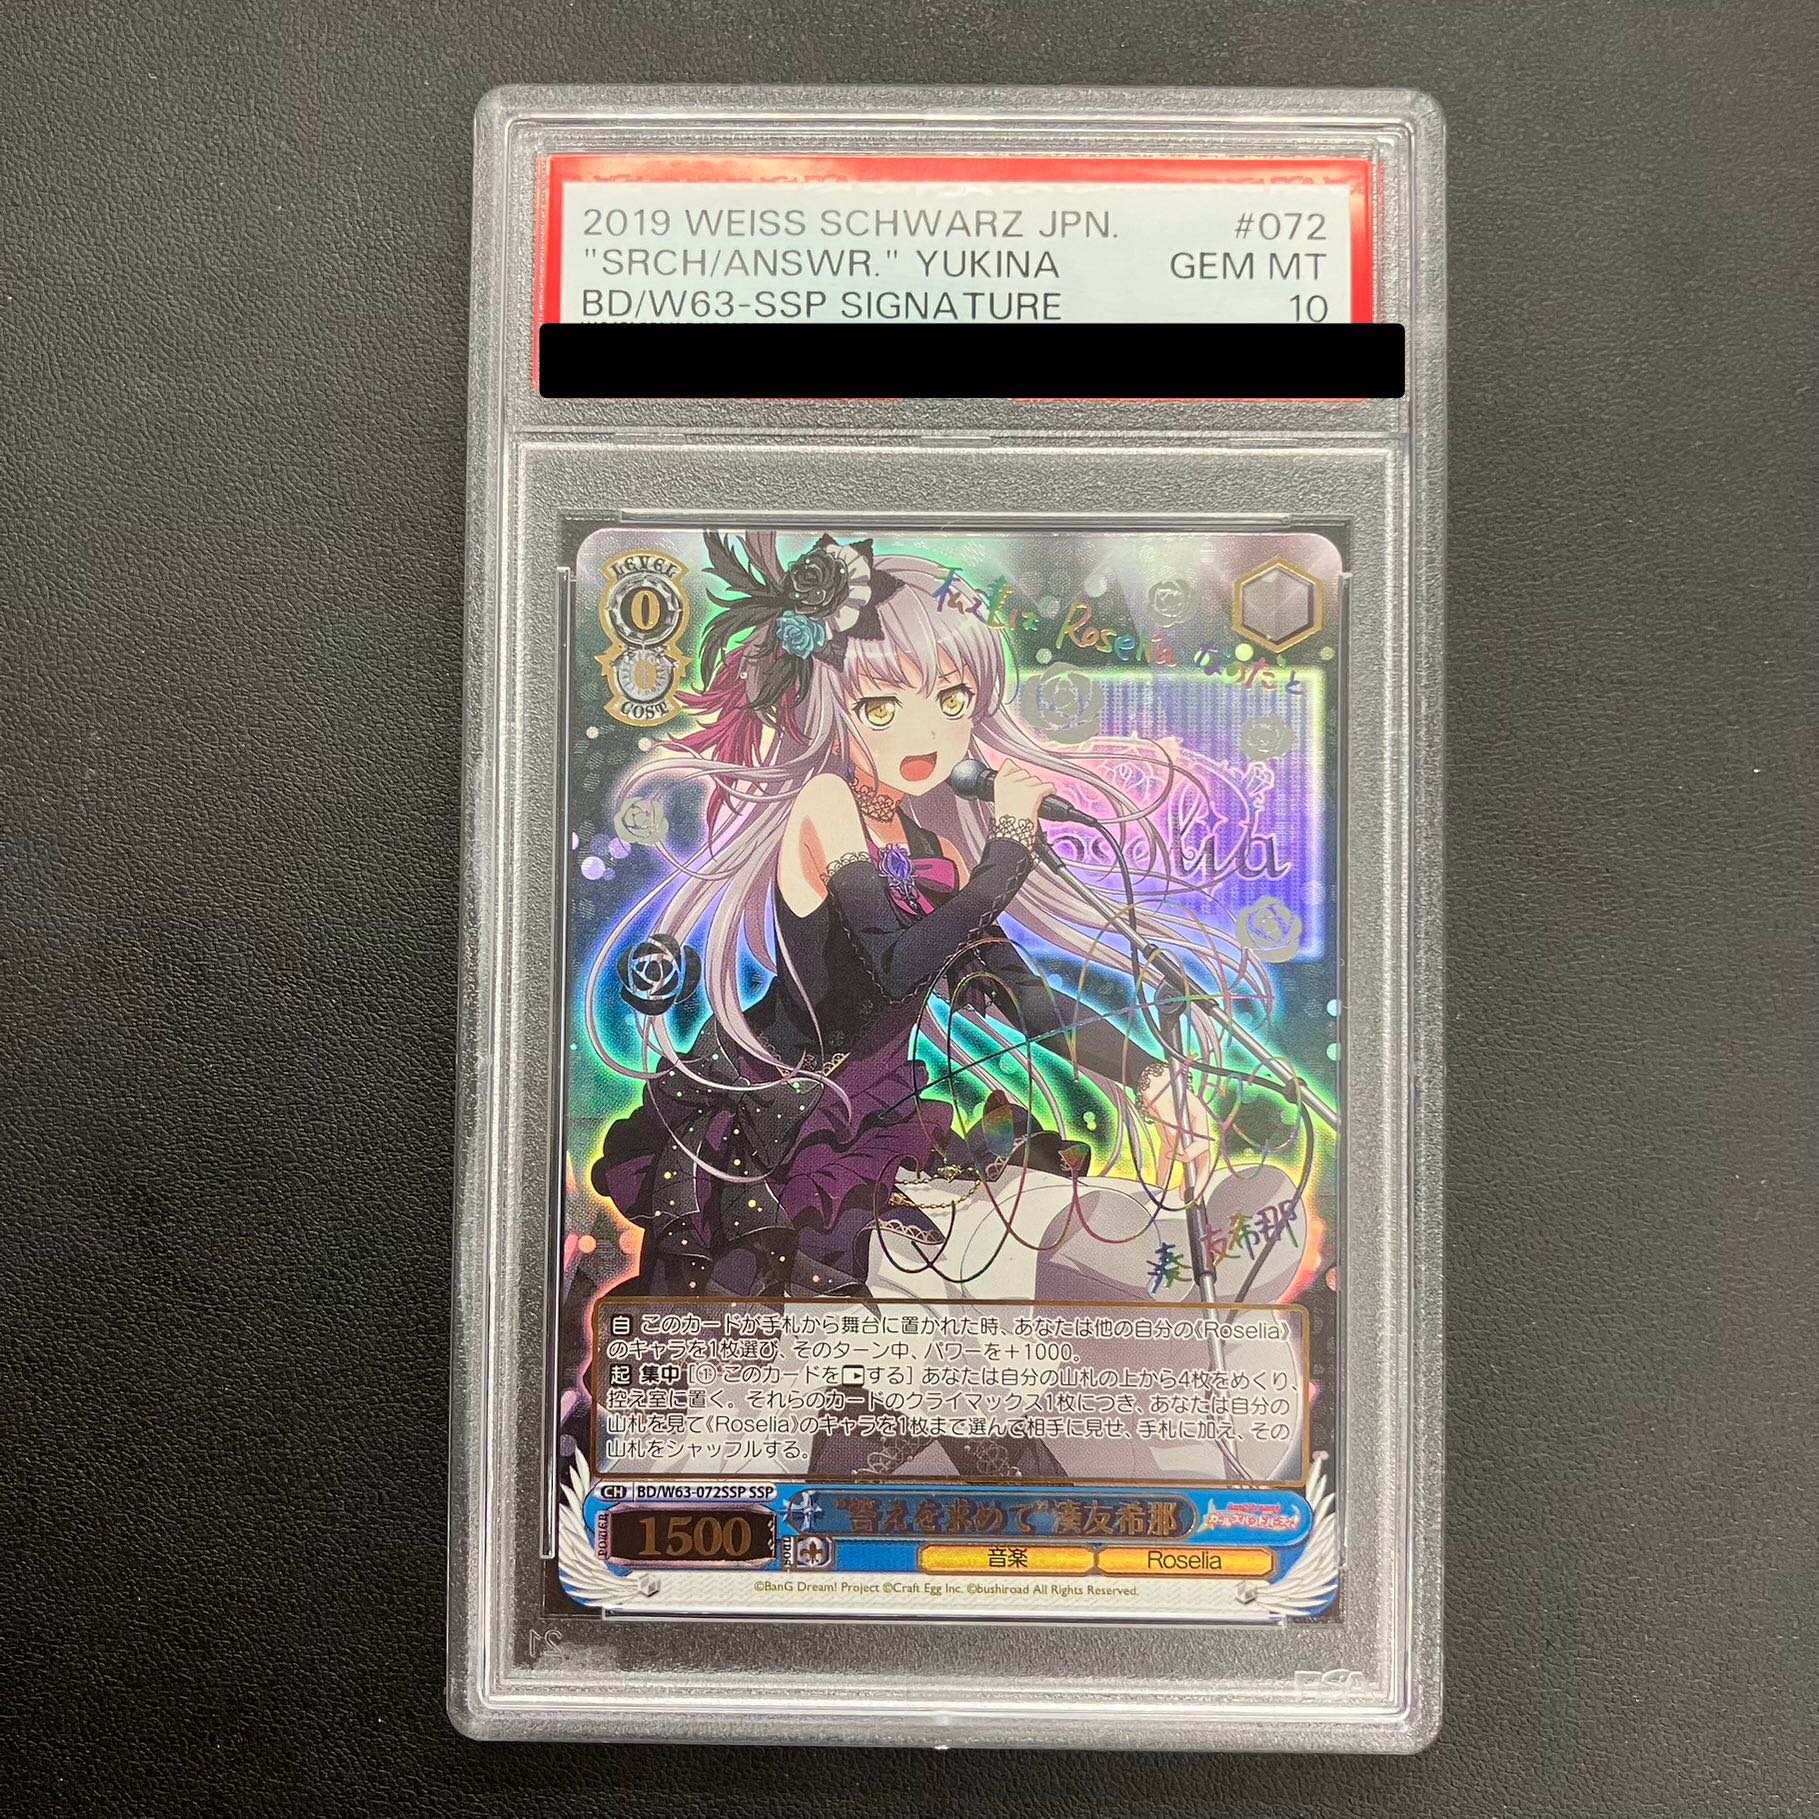 PSA10] "In Search of the Answer" Yukina Minato (Signed) SP BD/W63-072SPb